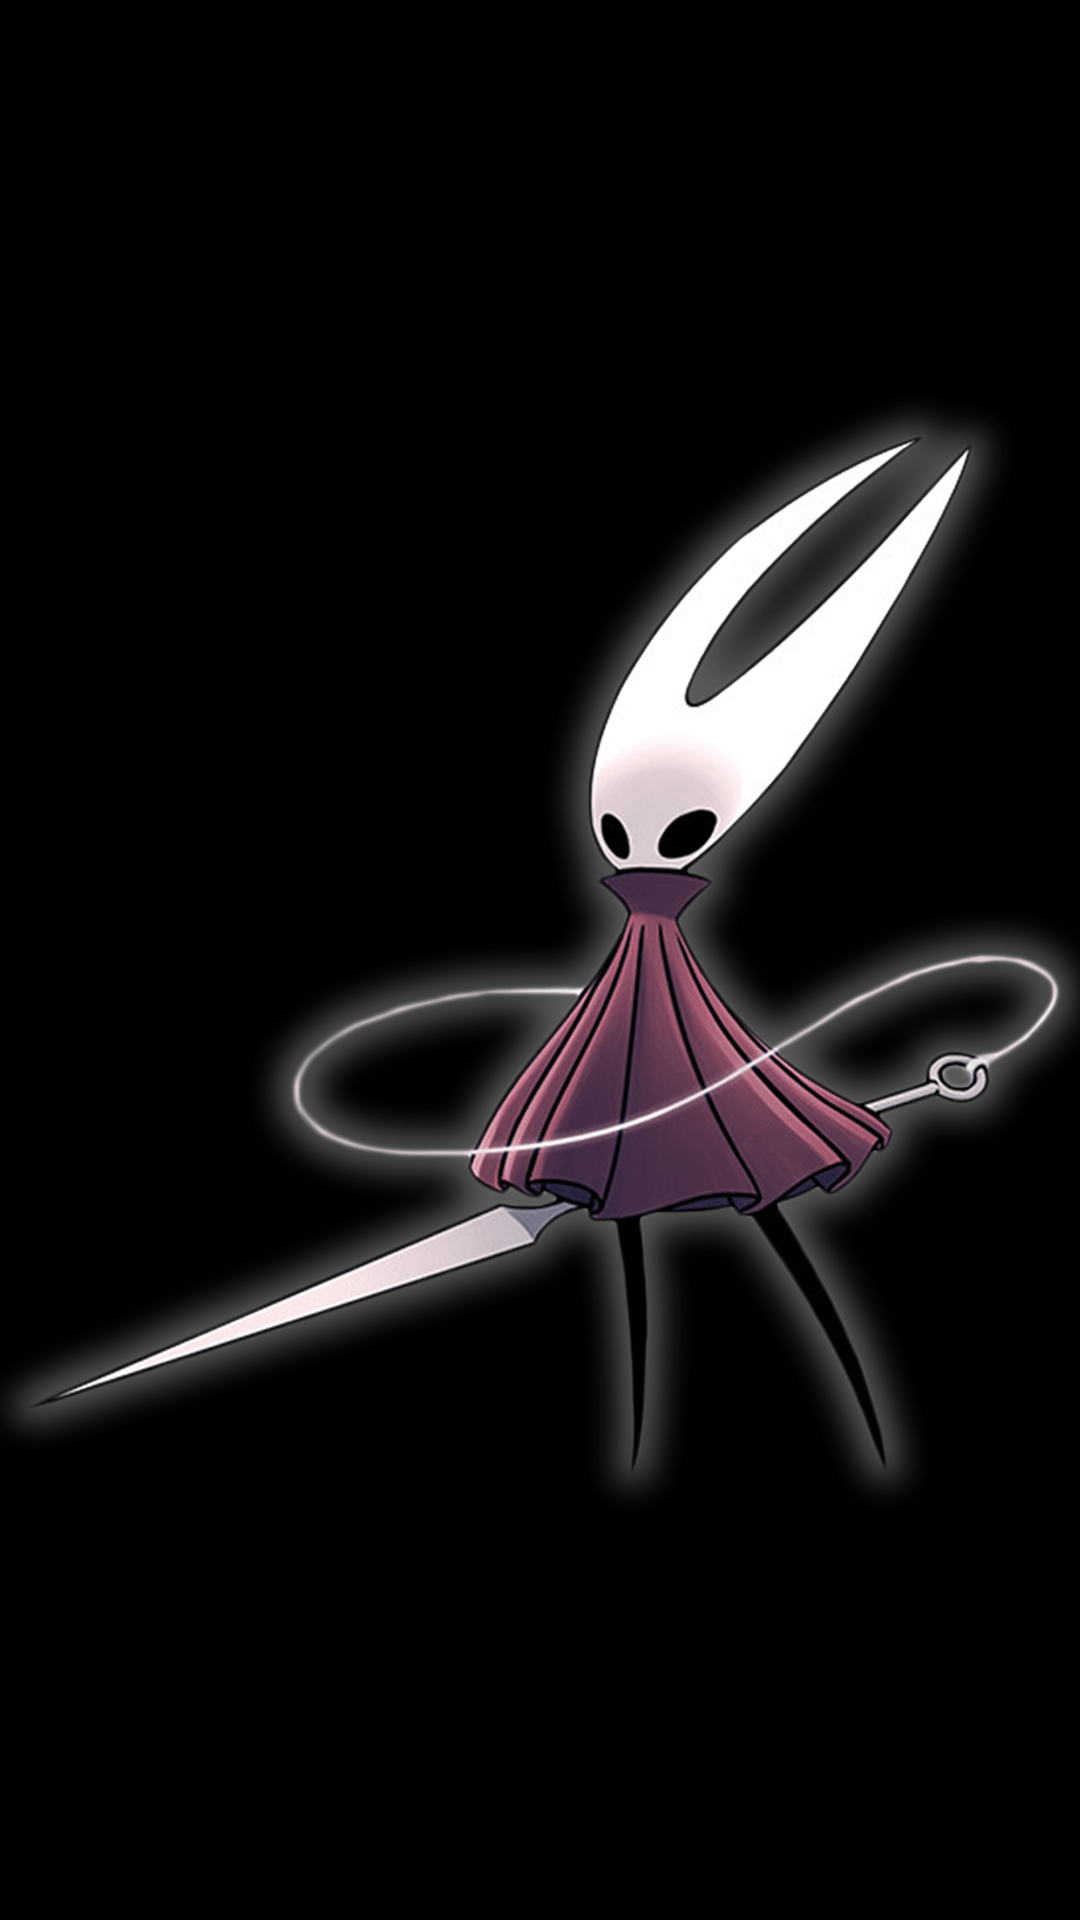 Hornet from Hollow Knight [1080x1920]